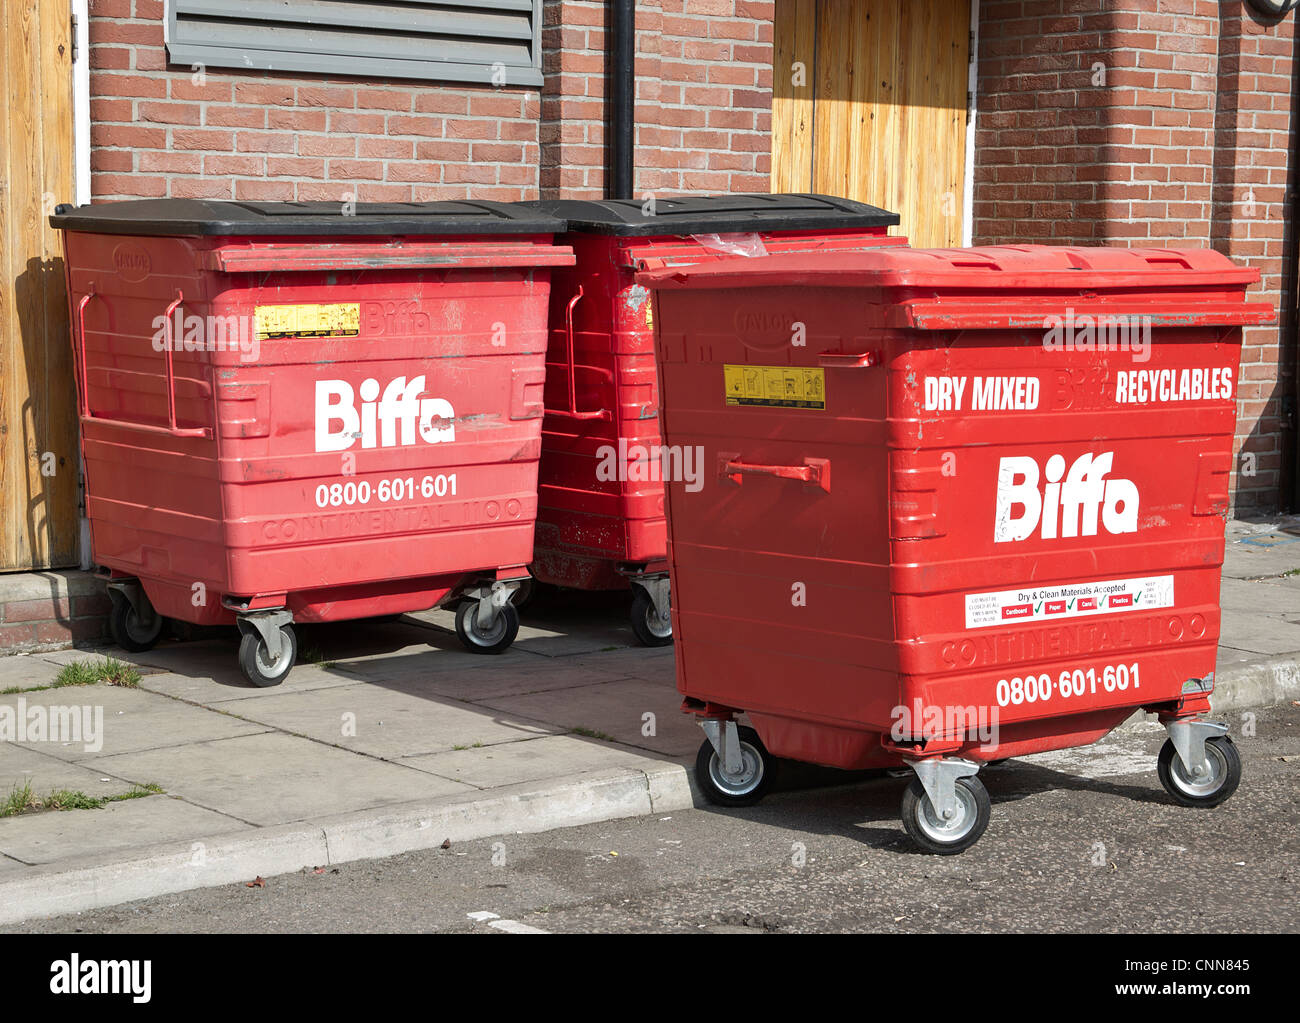 Large Recycle Bin Biffa Commercial Waste Recycling Stock Photo